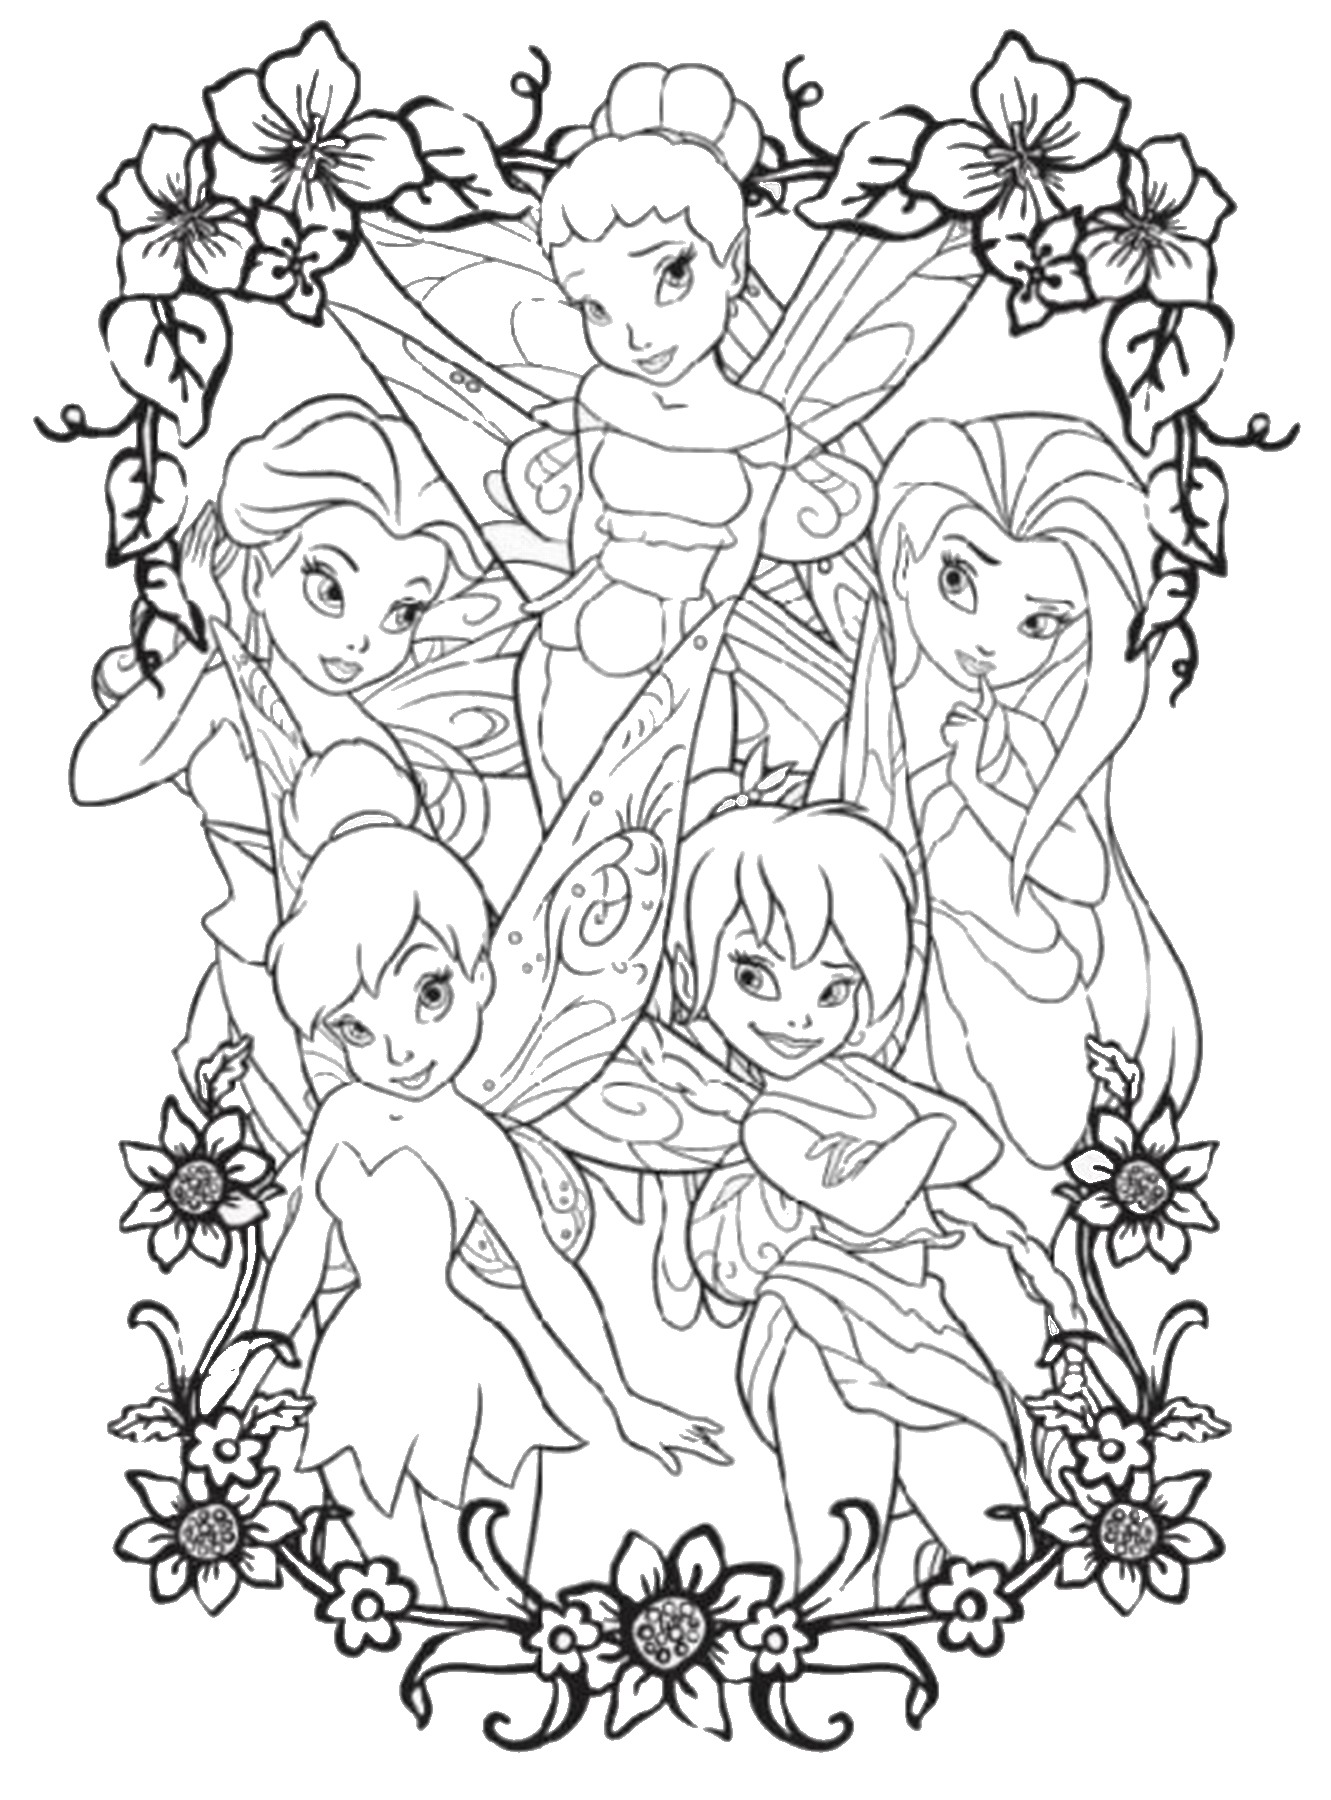 tinkerbell coloring 30 tinkerbell coloring pages  free coloring pages free tinkerbell coloring